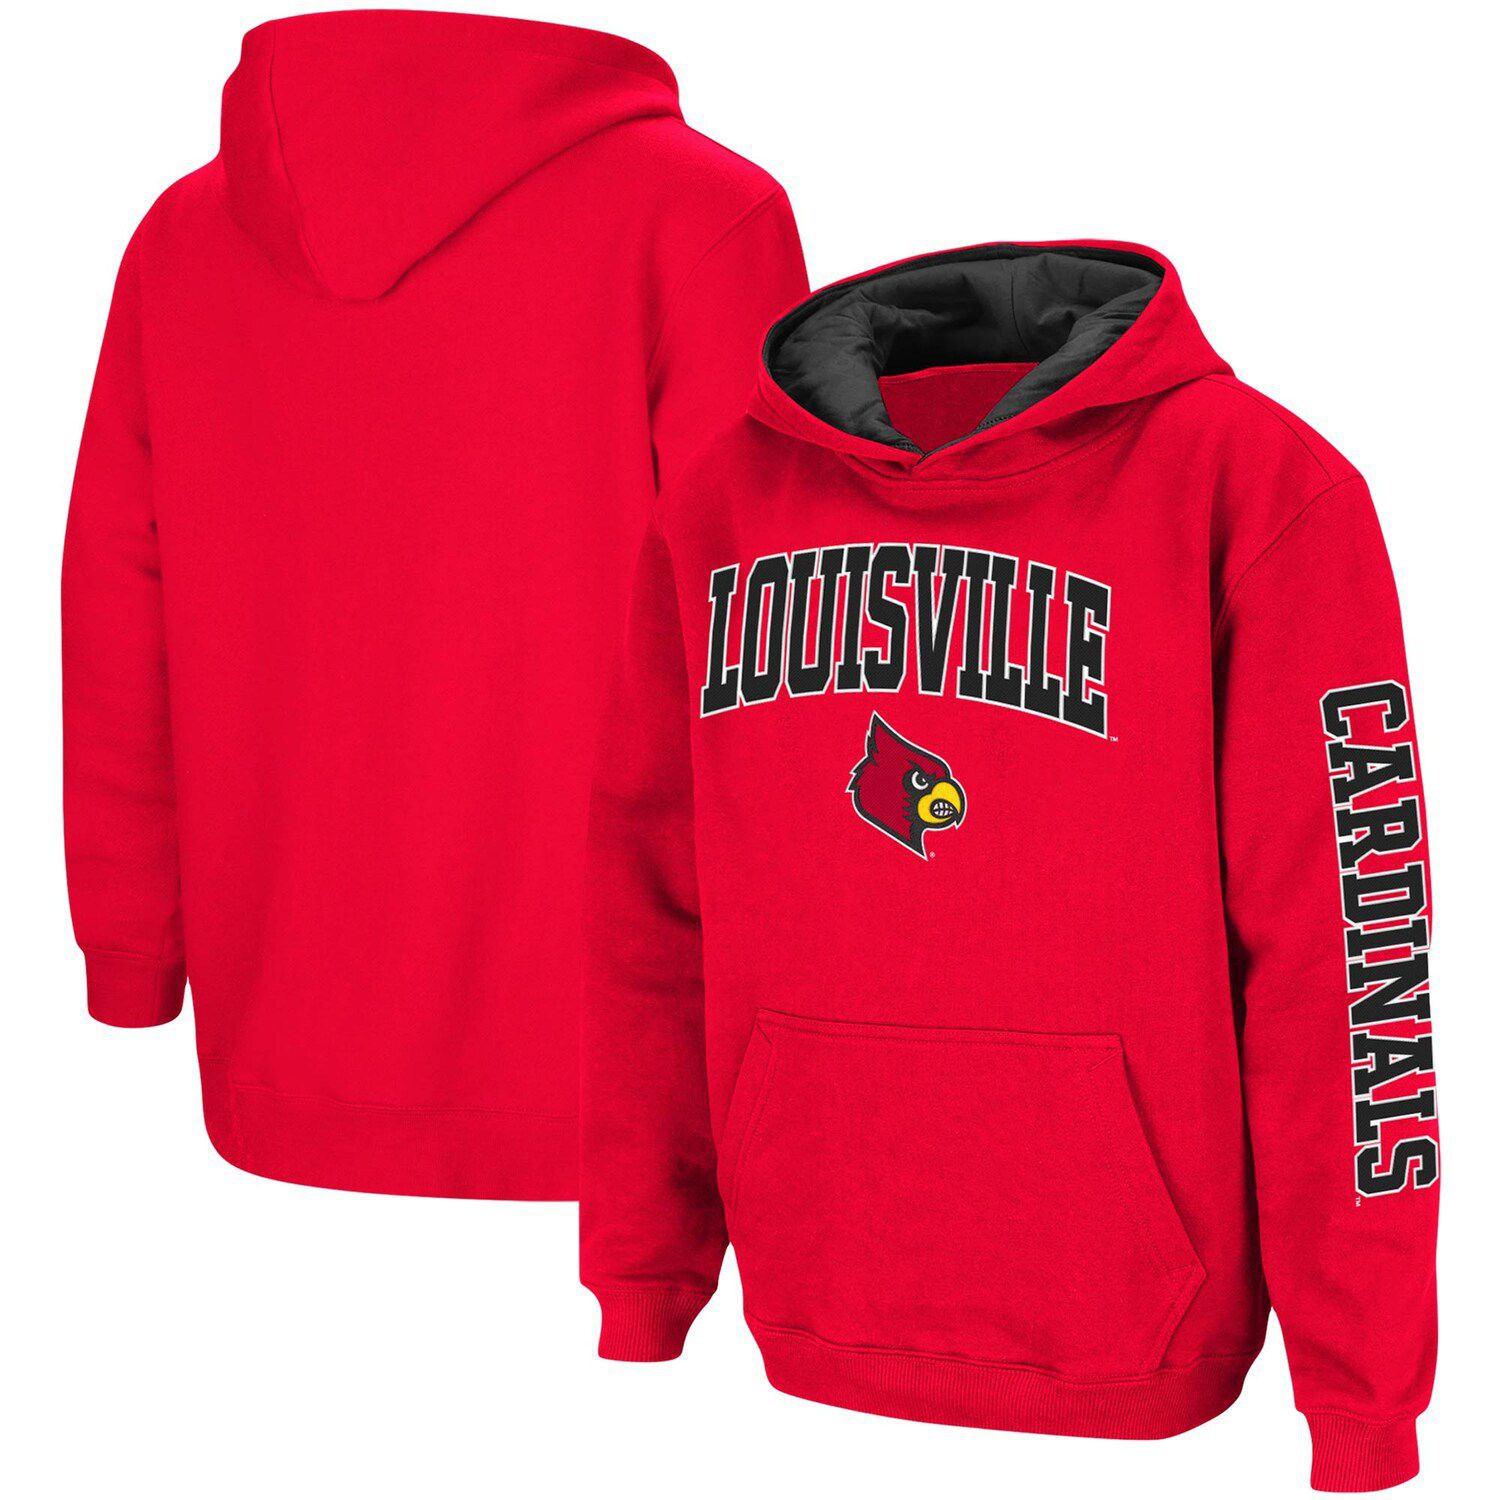 Men's Champion Heather Gray Louisville Cardinals High Motor Pullover Hoodie Size: Small